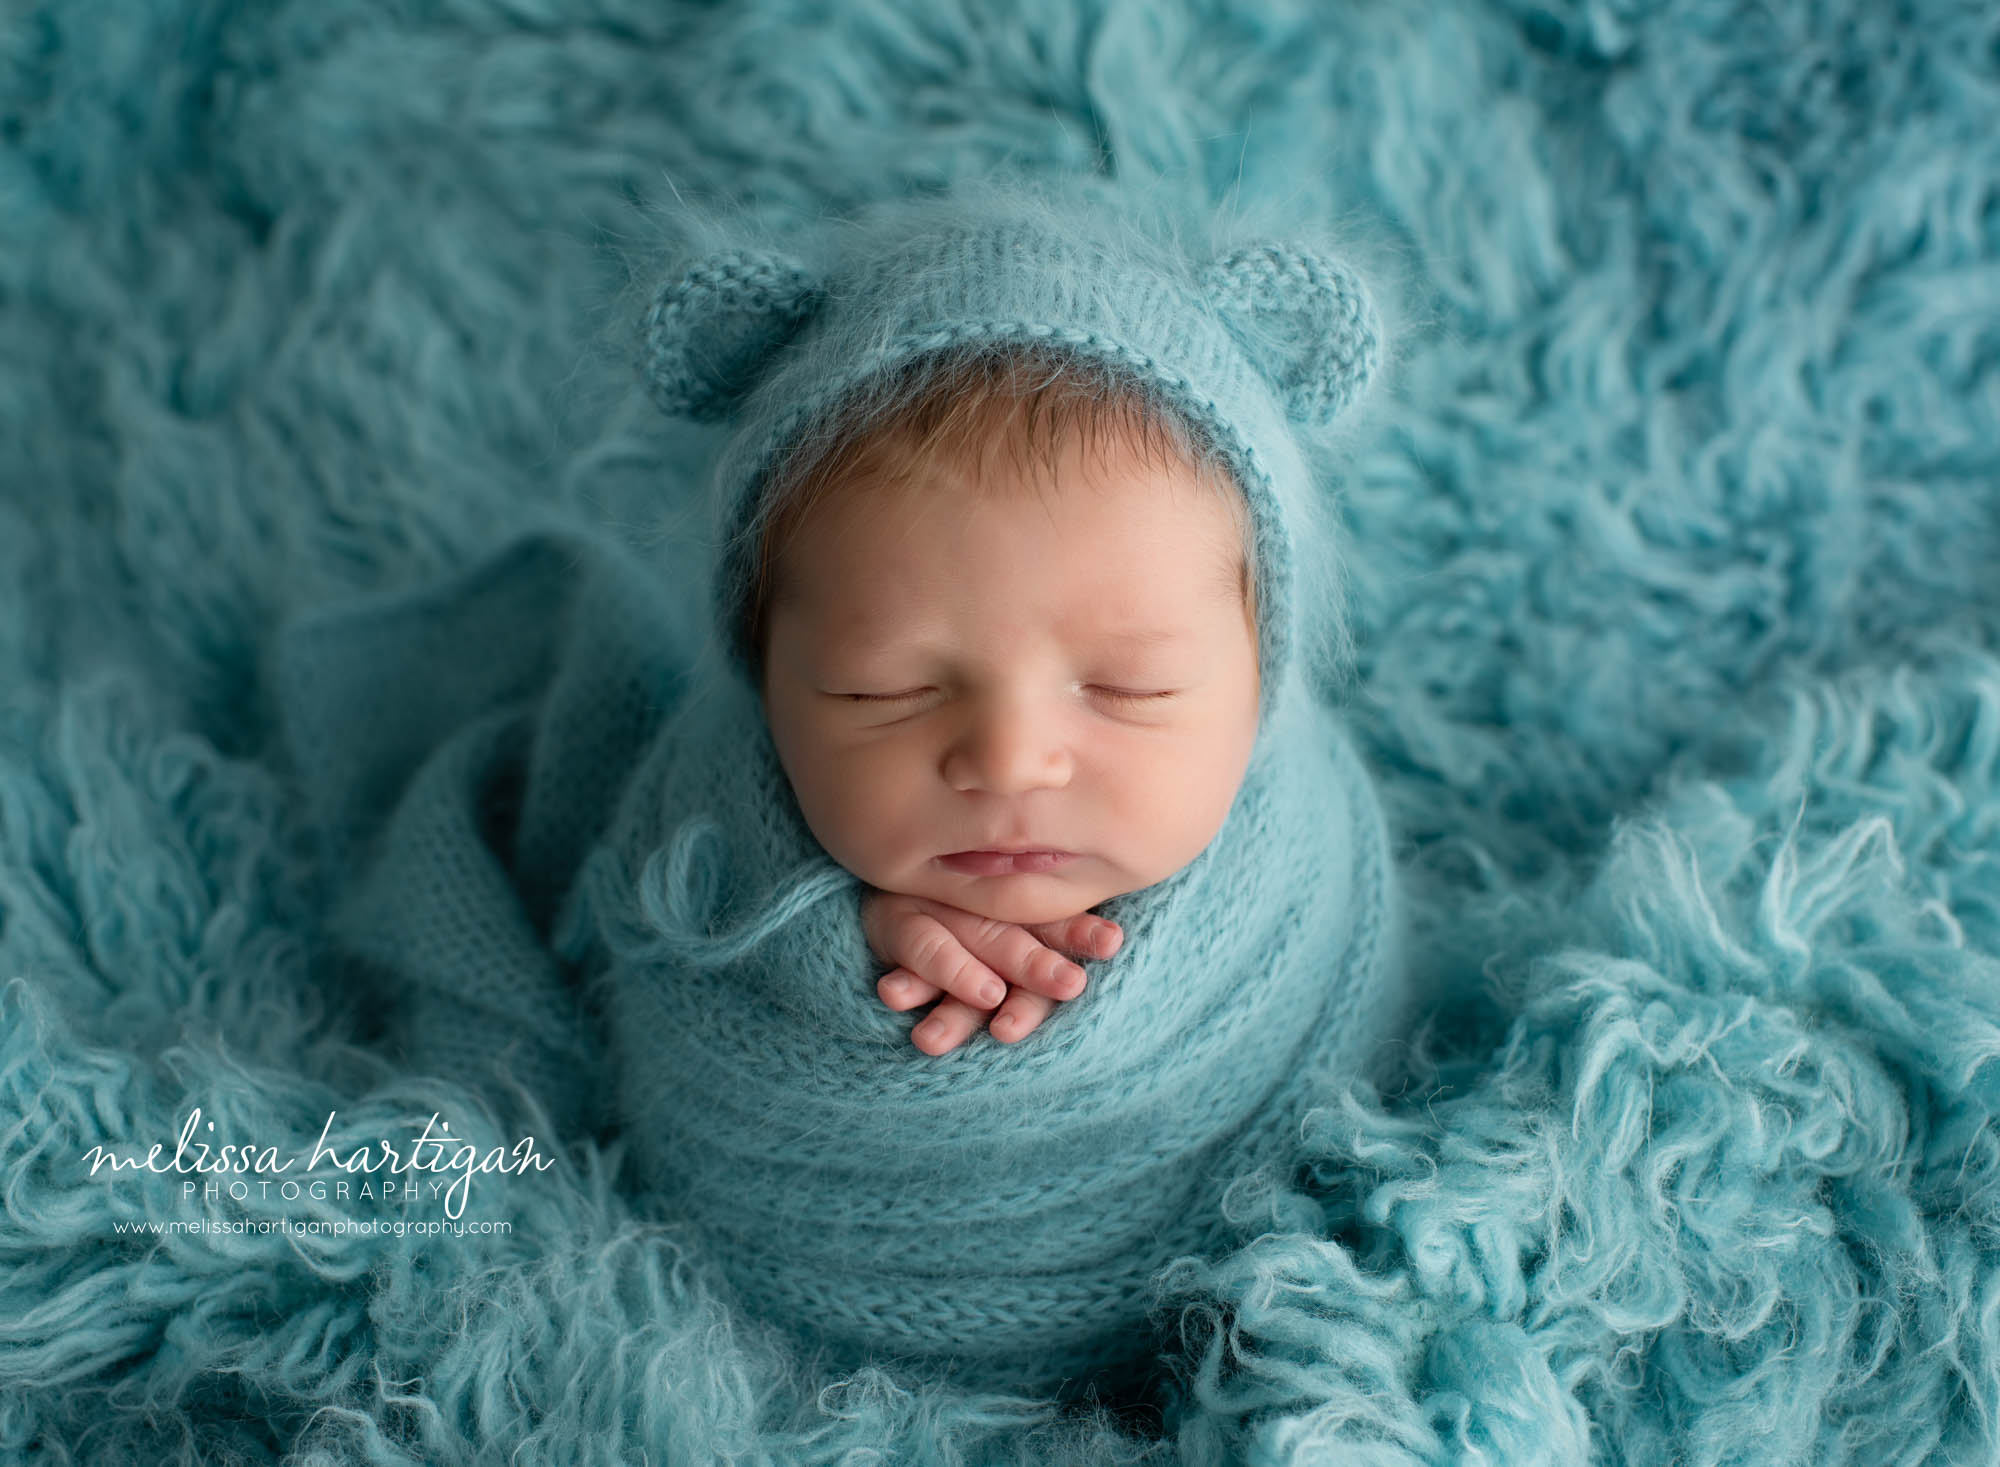 Baby boy wrapped in teal knitted wrap and matching bear bonnet on tal colored flokati